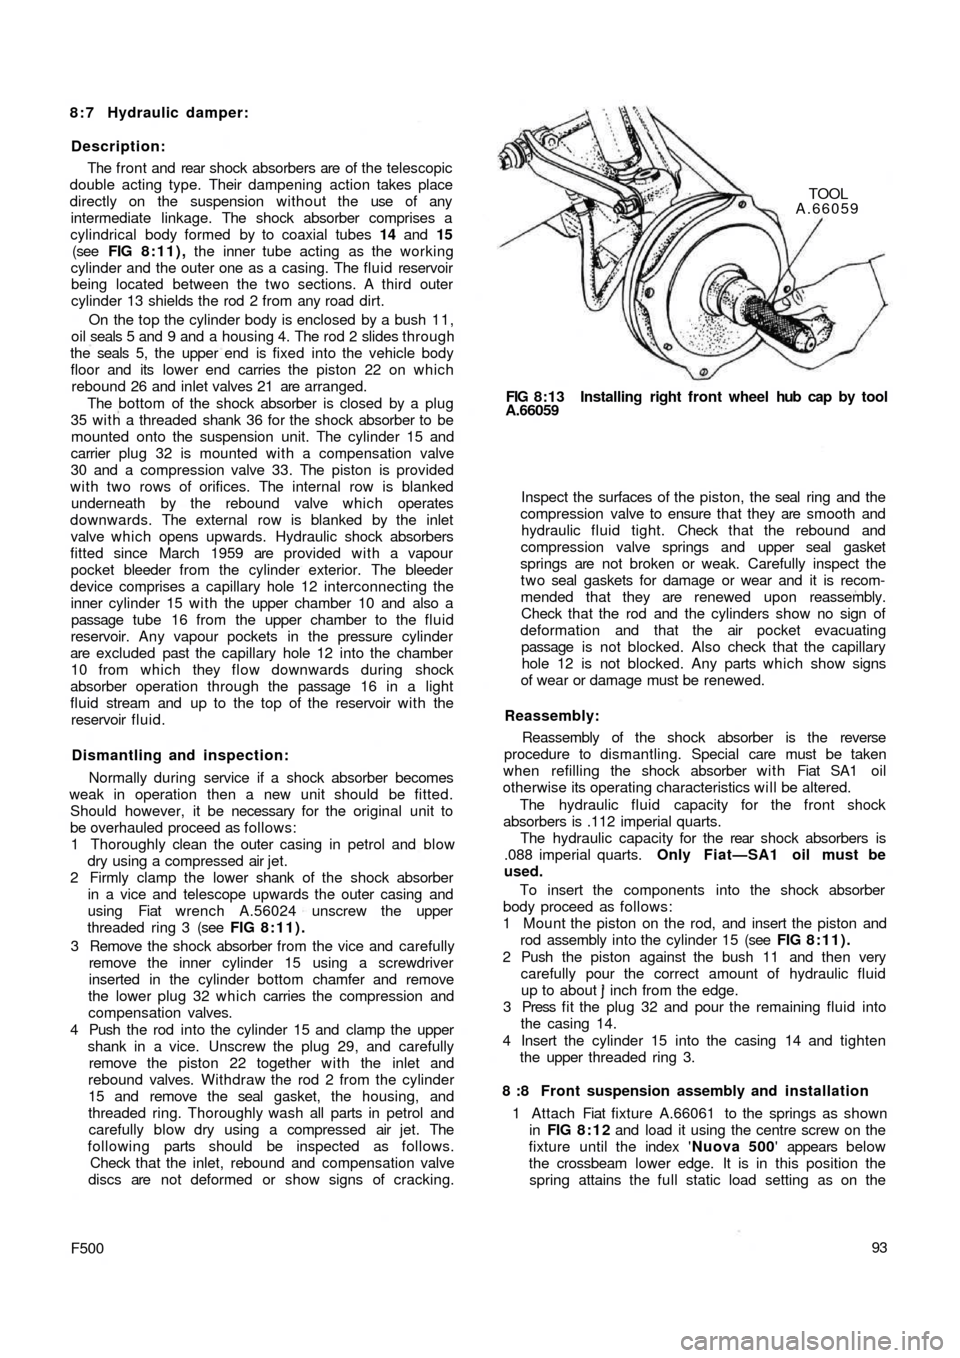 FIAT 500 1966 1.G Workshop Manual 8 : 7 Hydraulic damper:
Description:
The front and rear  shock absorbers are of the telescopic
double acting type. Their dampening action takes place
directly on the suspension without the use of any
